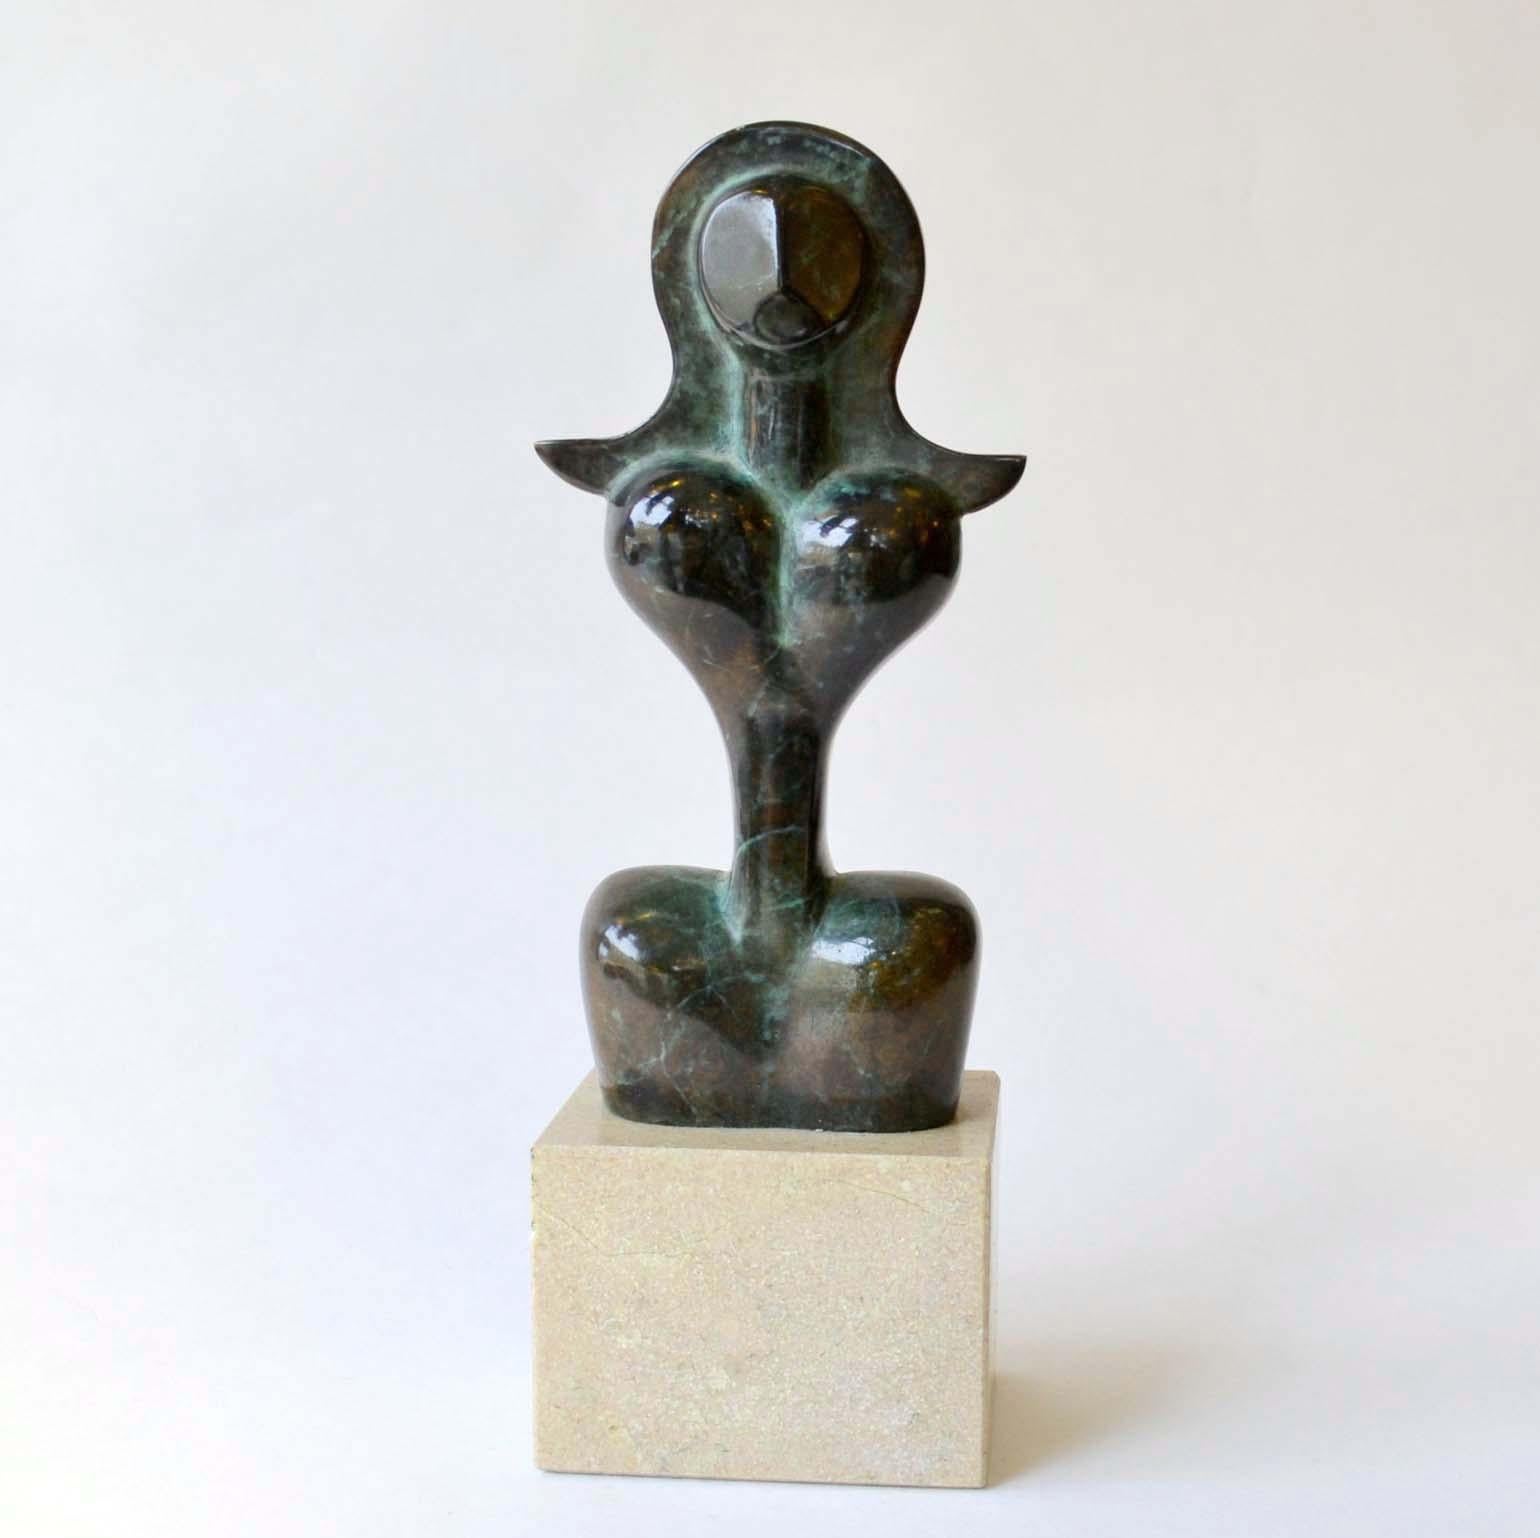 Abstract figurative sculpture of a curvaceous woman with long hair in patinated and highly polished bronze is placed on a marble plinth. This unknown female figurative sculpture is indicative of Alexander Archipenko an American-Ukrainian cubist